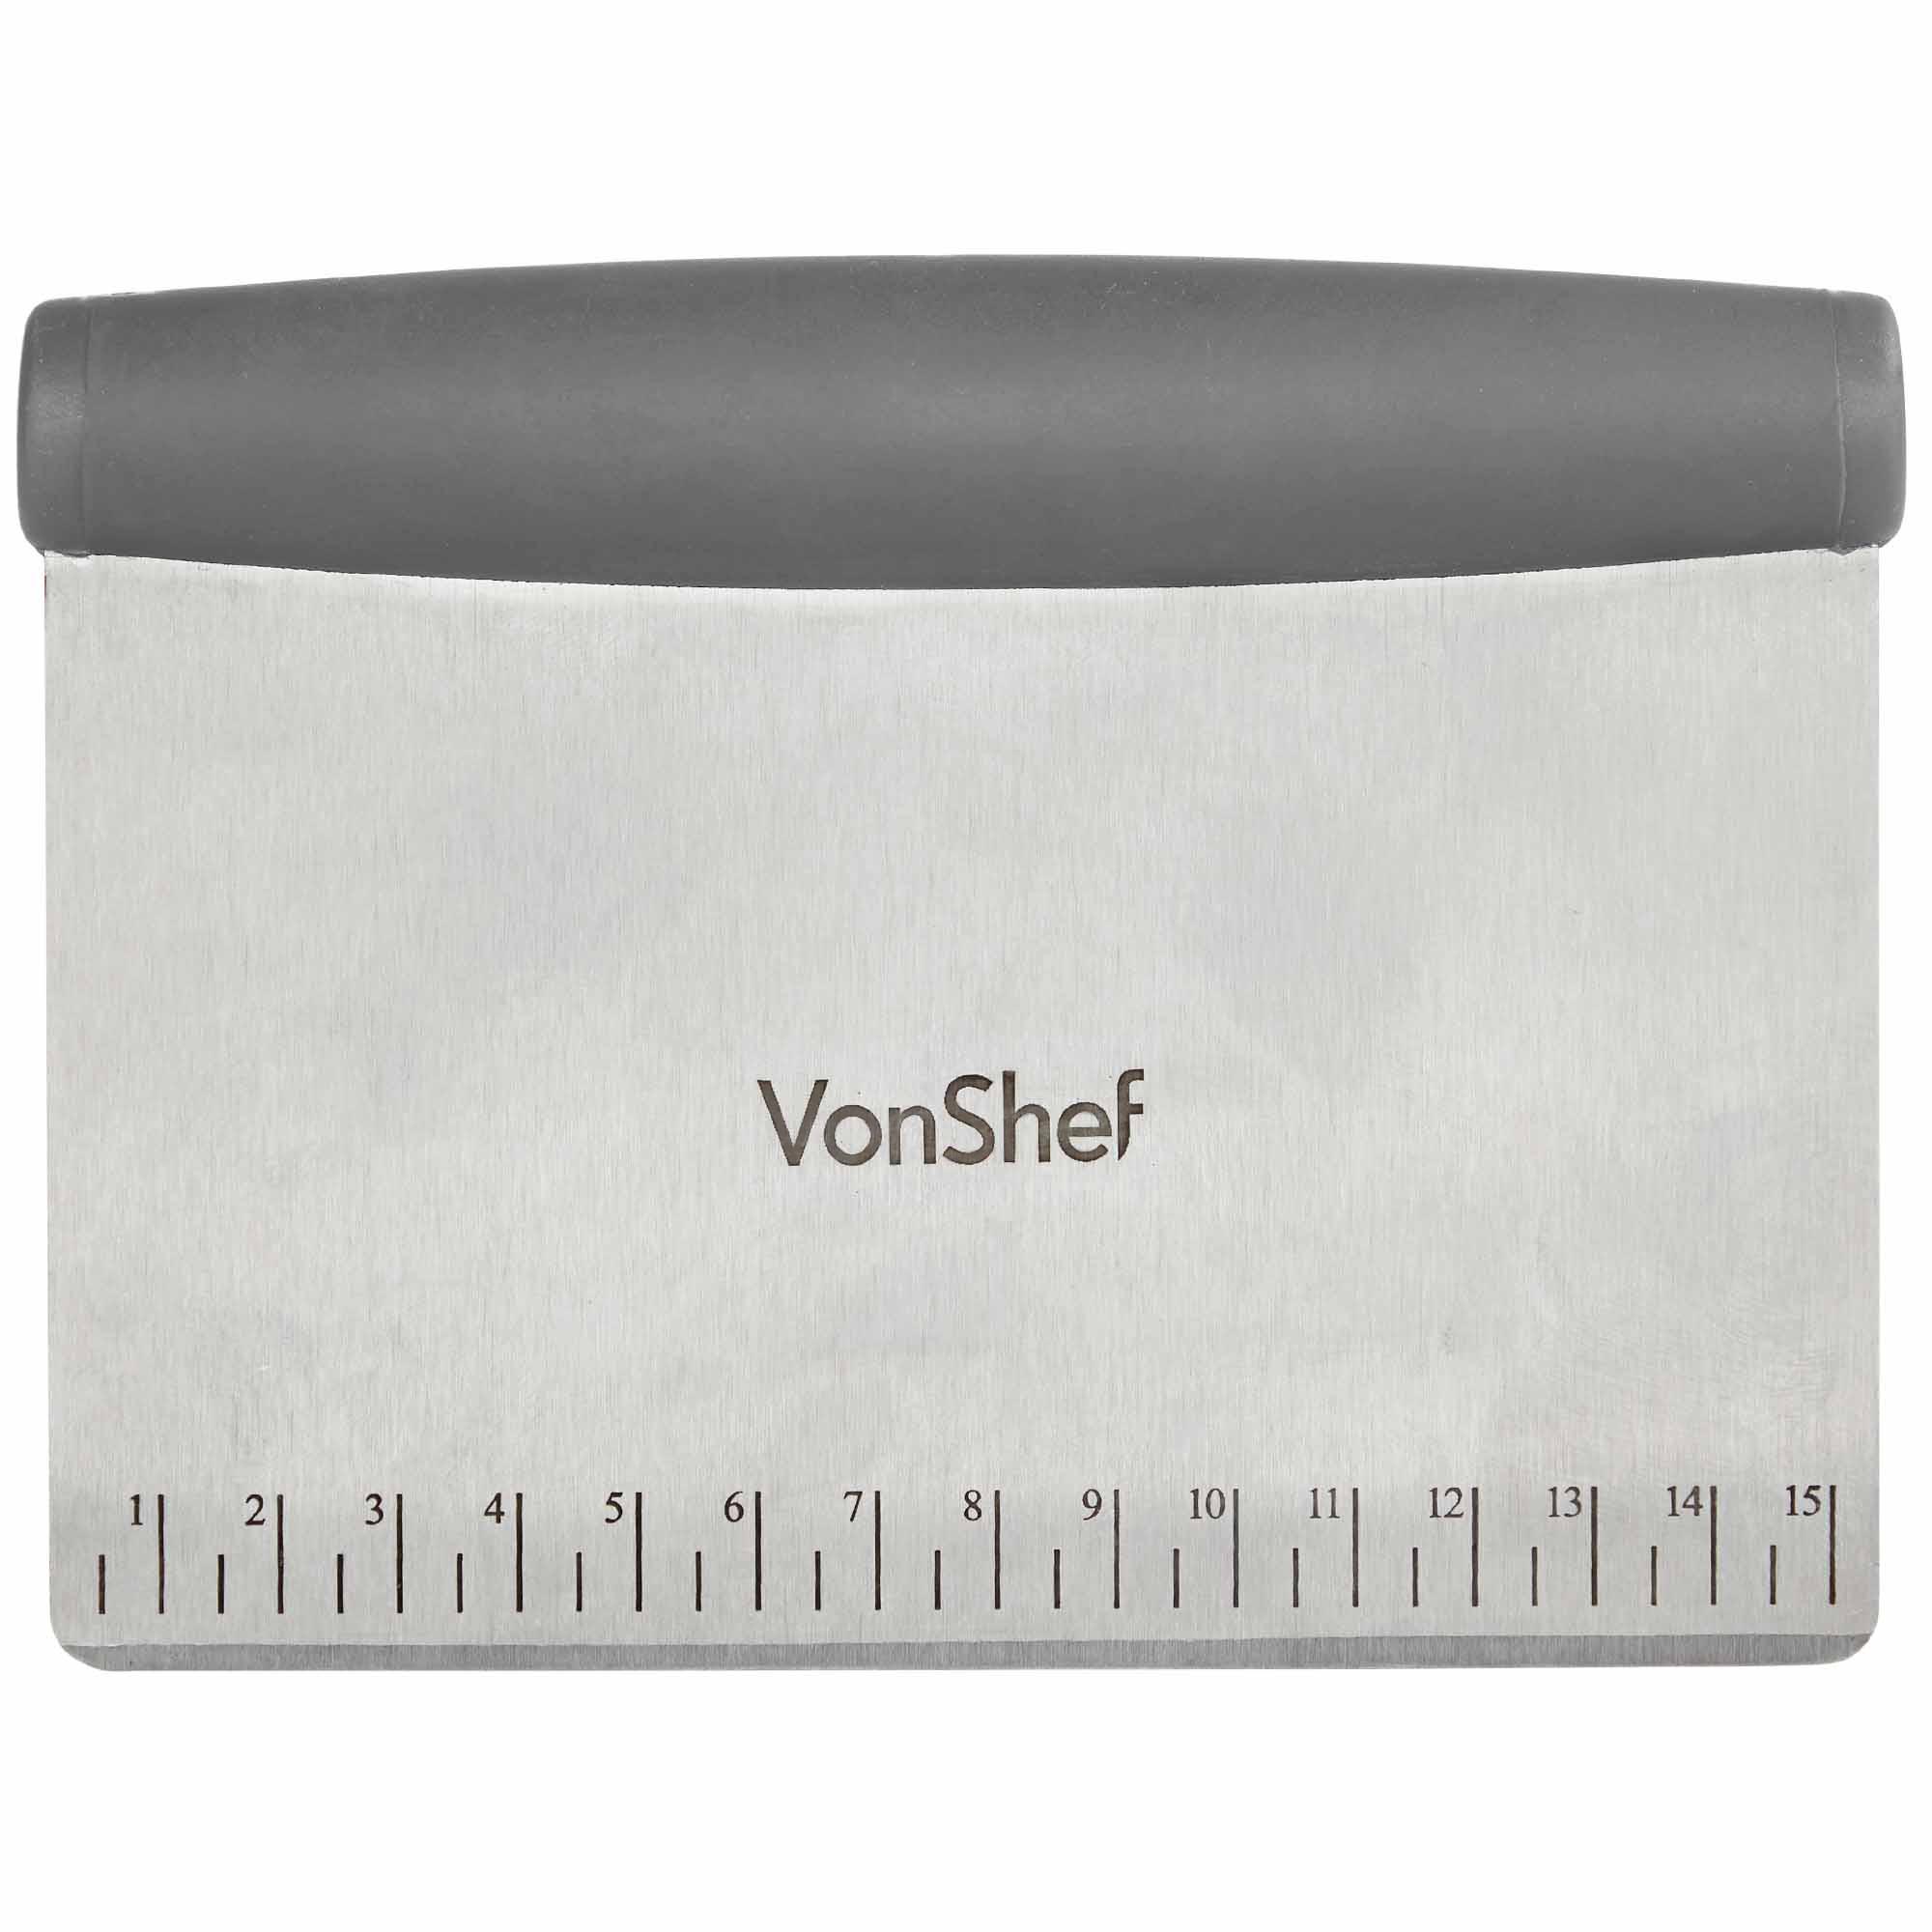 VONSHEF DOUGH SCRAPER – PROFESSIONAL STAINLESS STEEL - CUTTER / PASTRY SLICER WITH MEASURING GUIDE